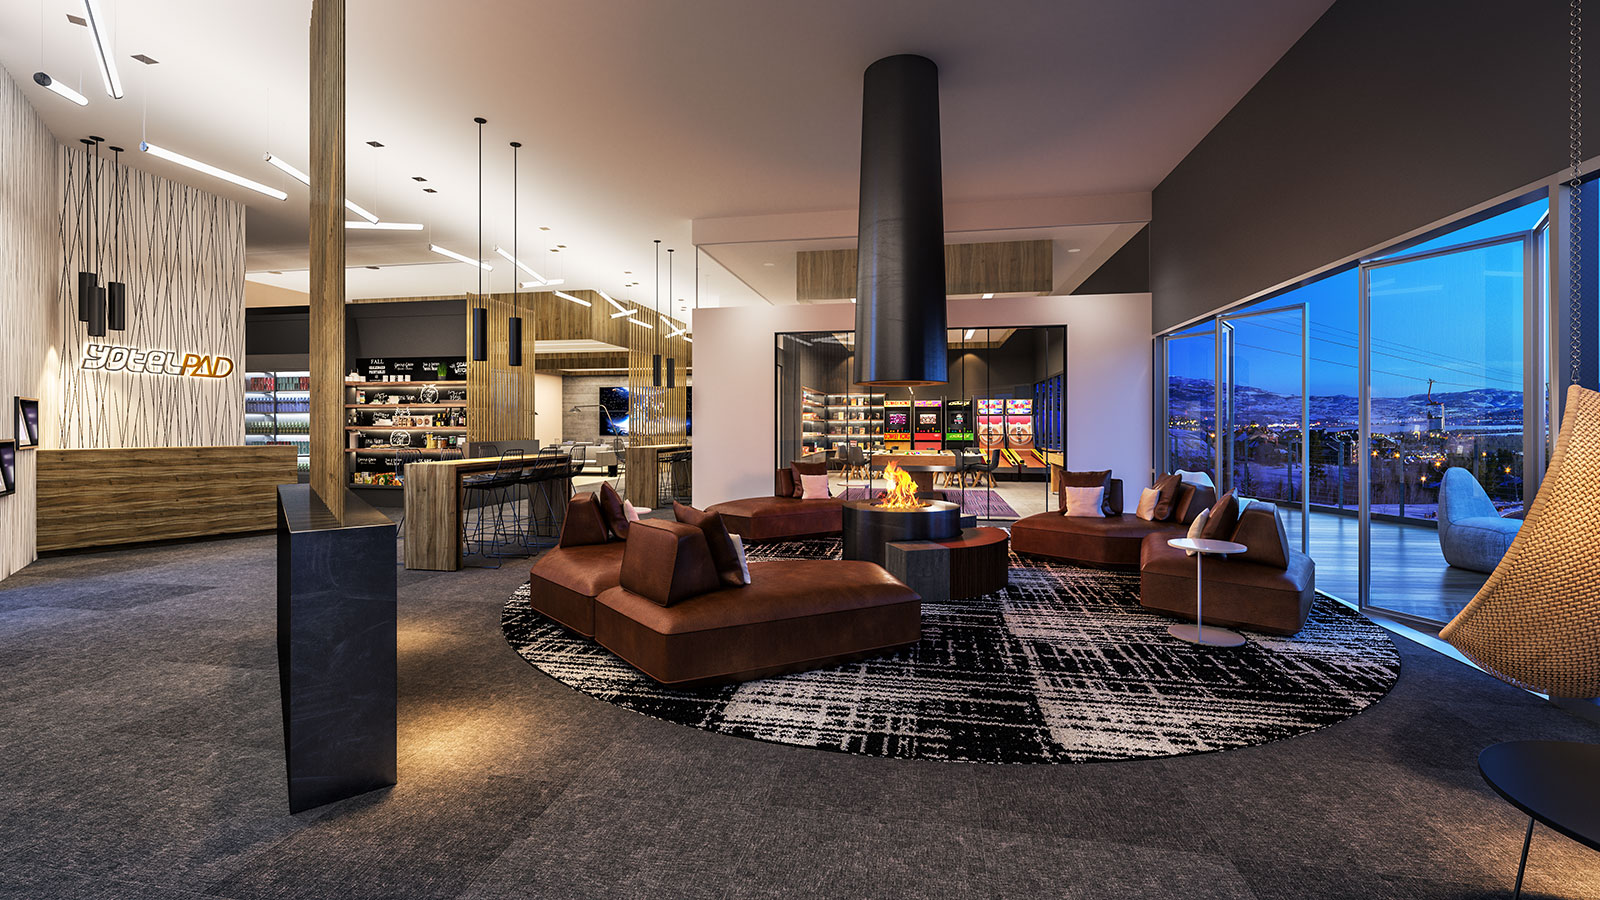 YotelPad: Social spaces, fireplace and lounge